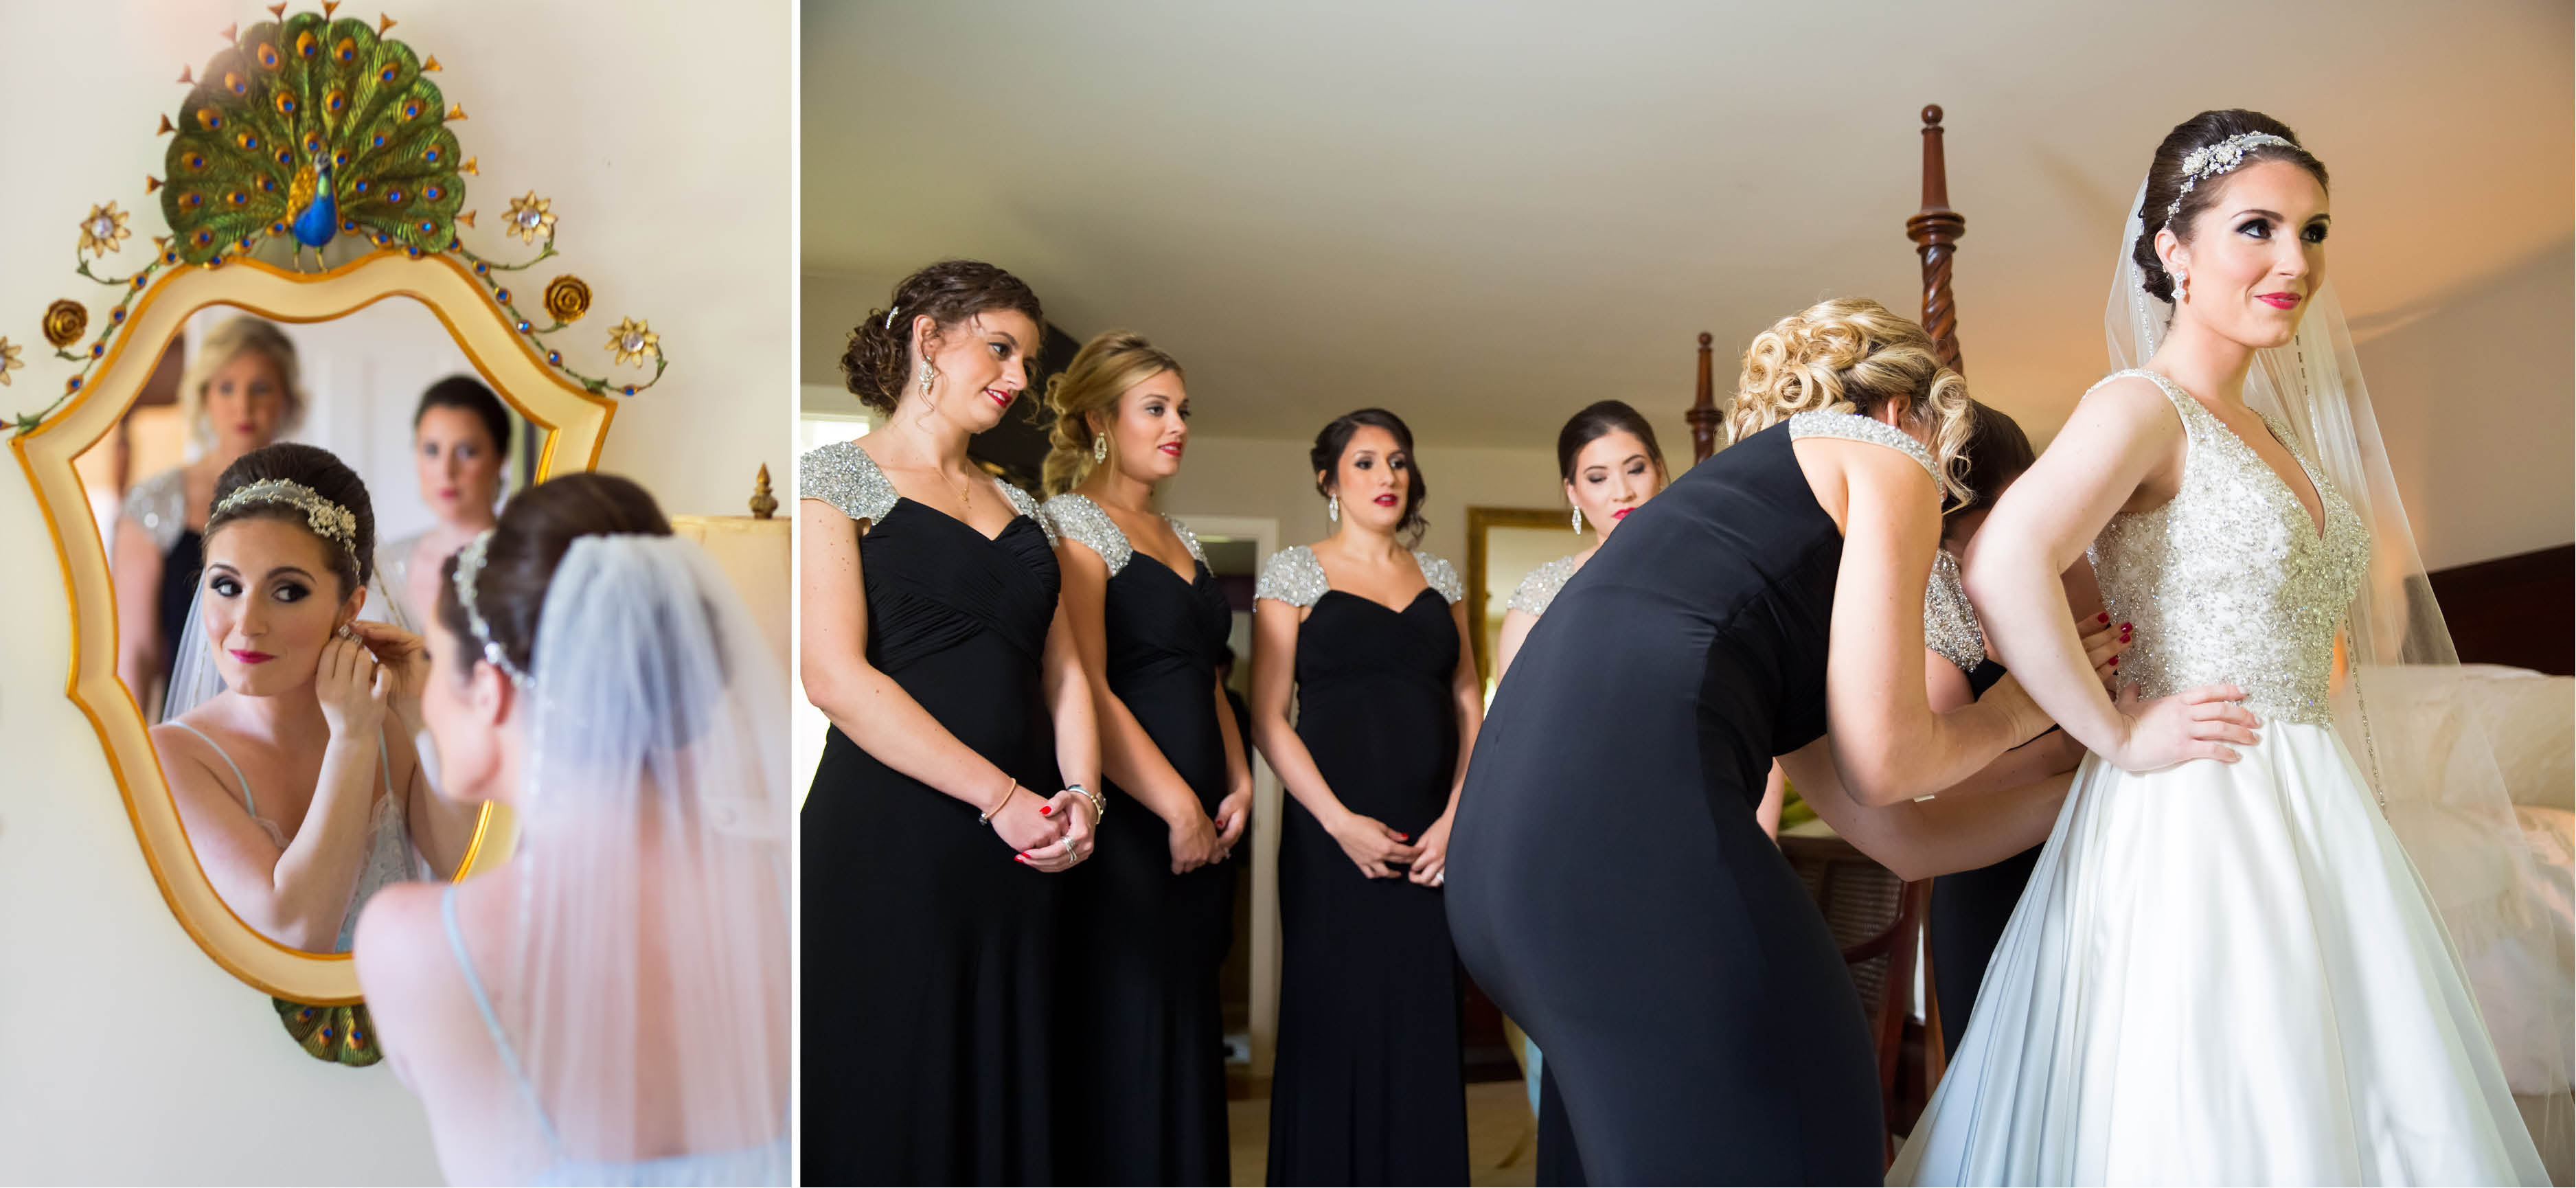 Emma_cleary_photography falkirk estate wedding3